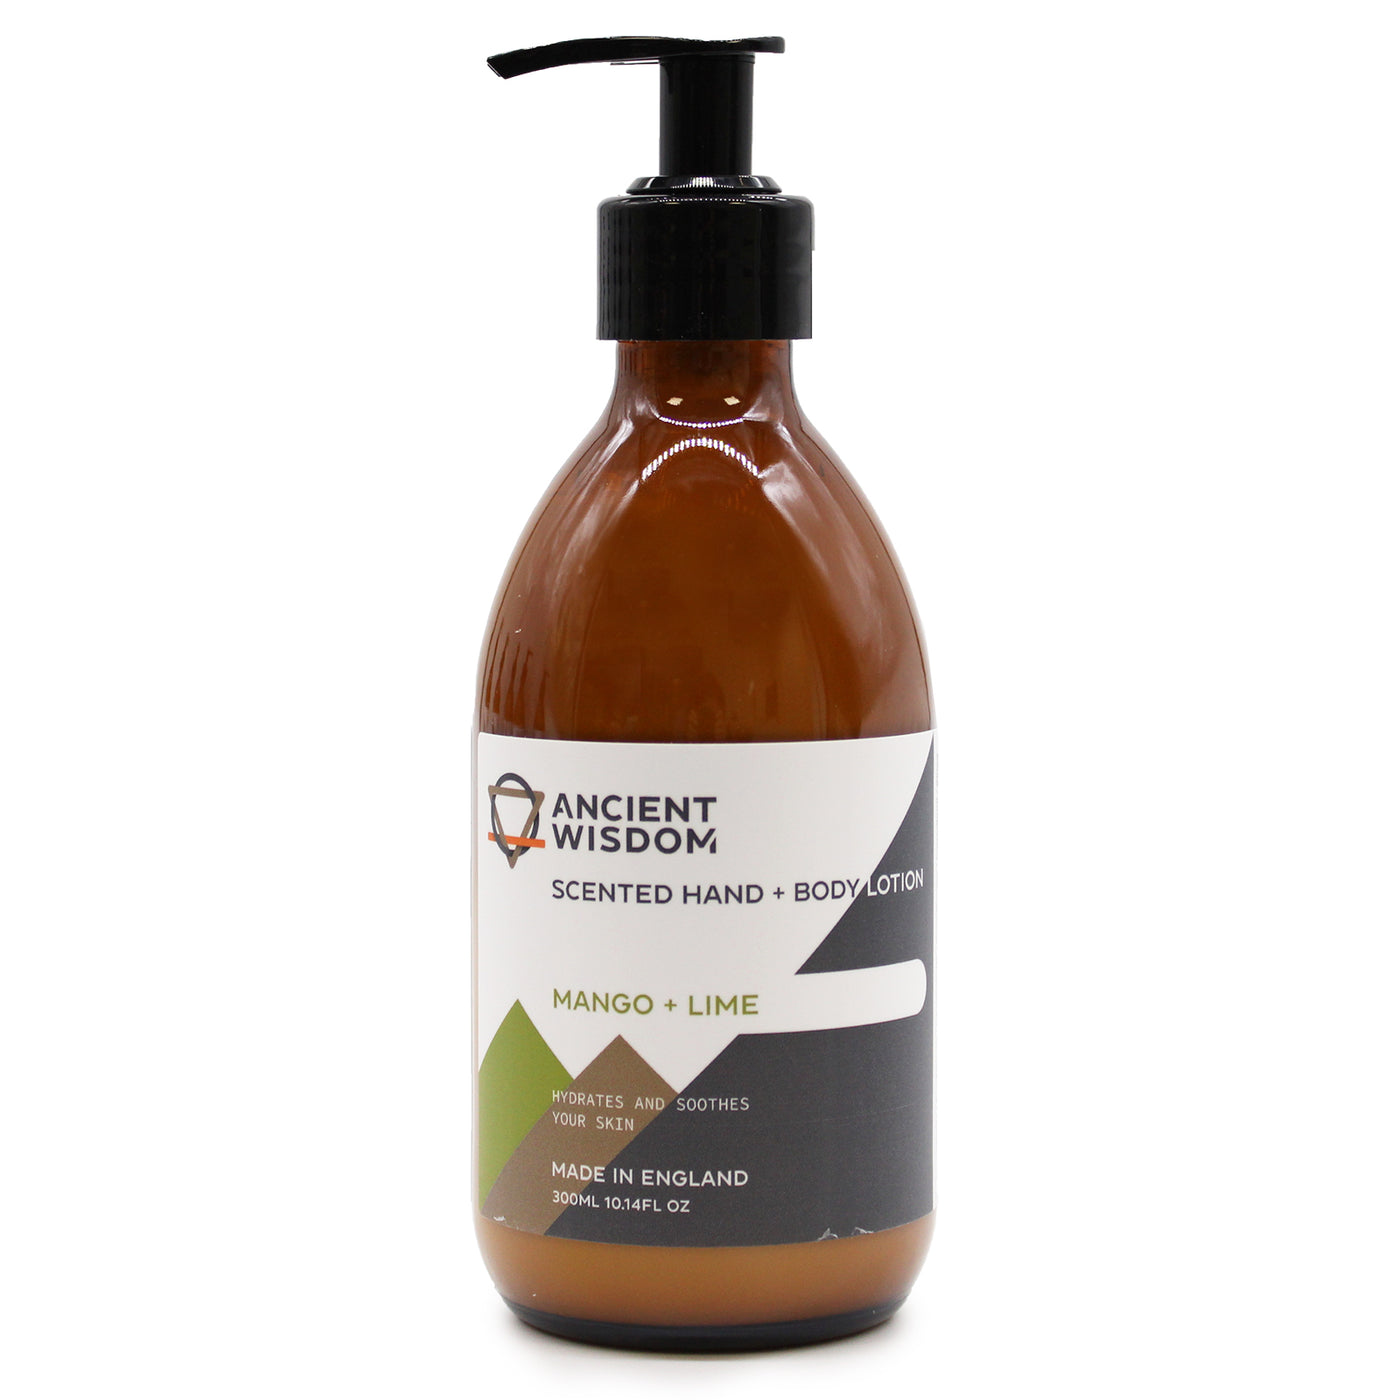 Fragranced Parabens Free Mango And Lime Hand & Body Lotion